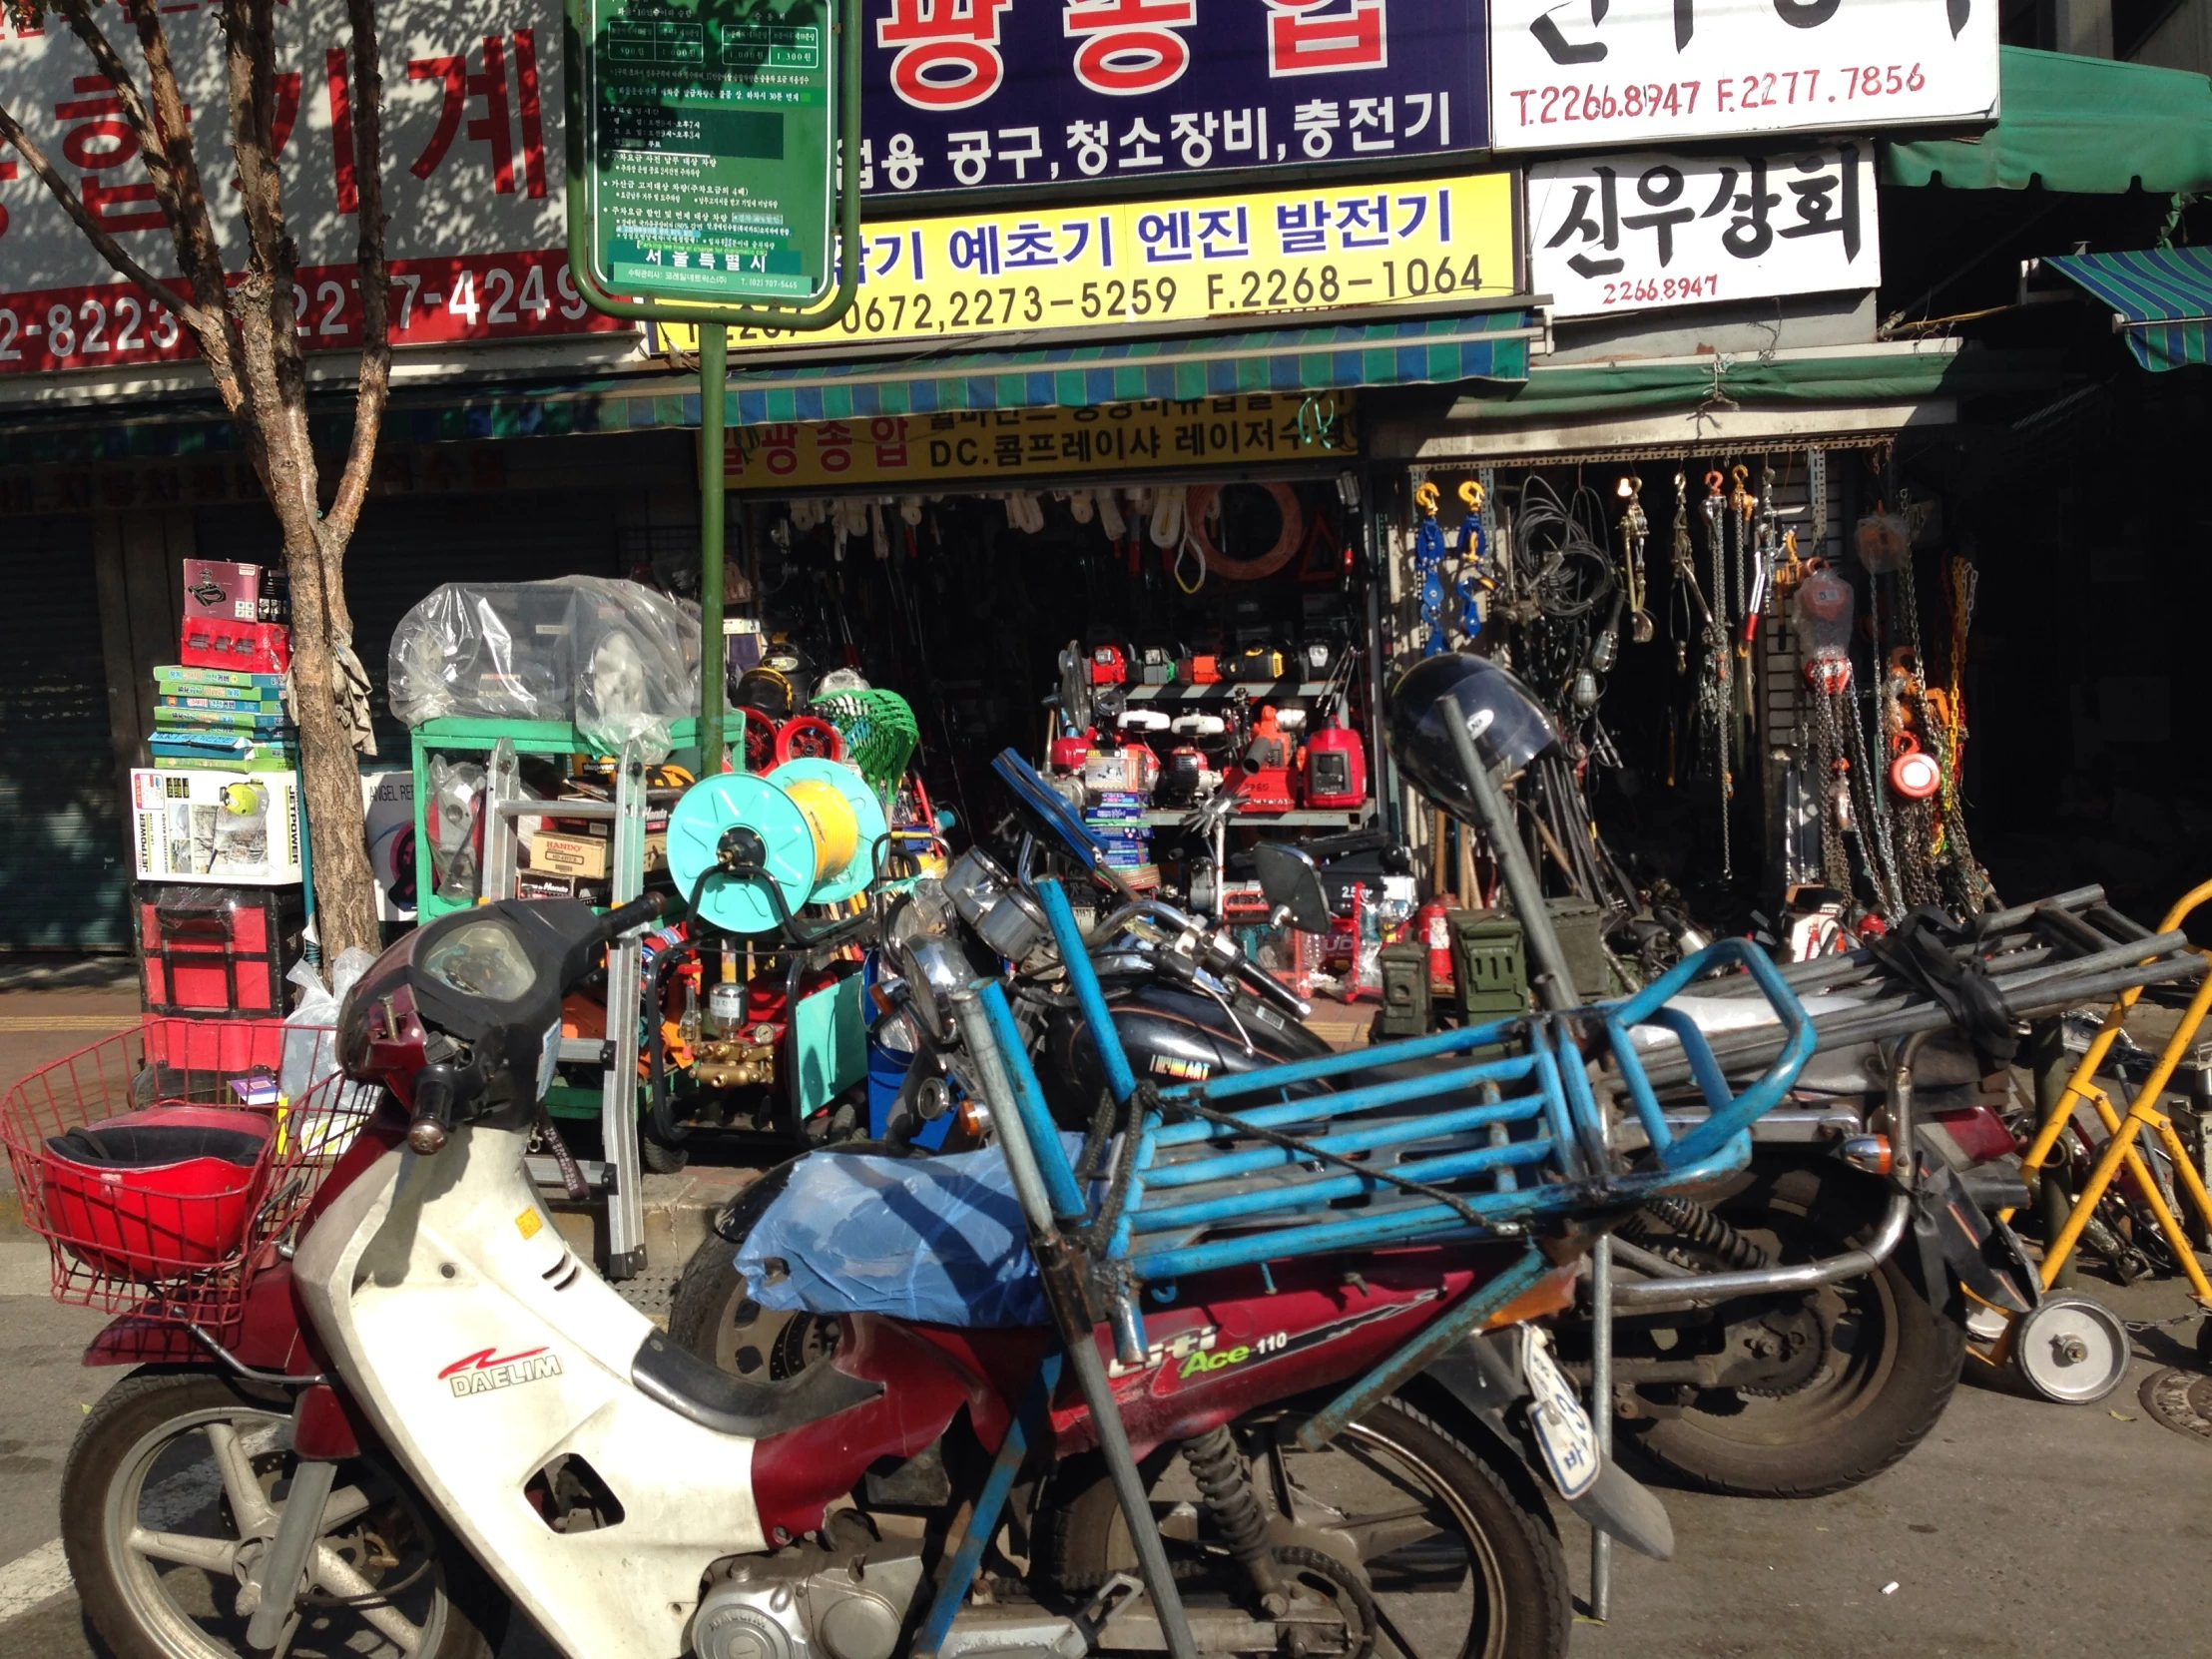 motorcycles parked outside a shop with signs in oriental languages